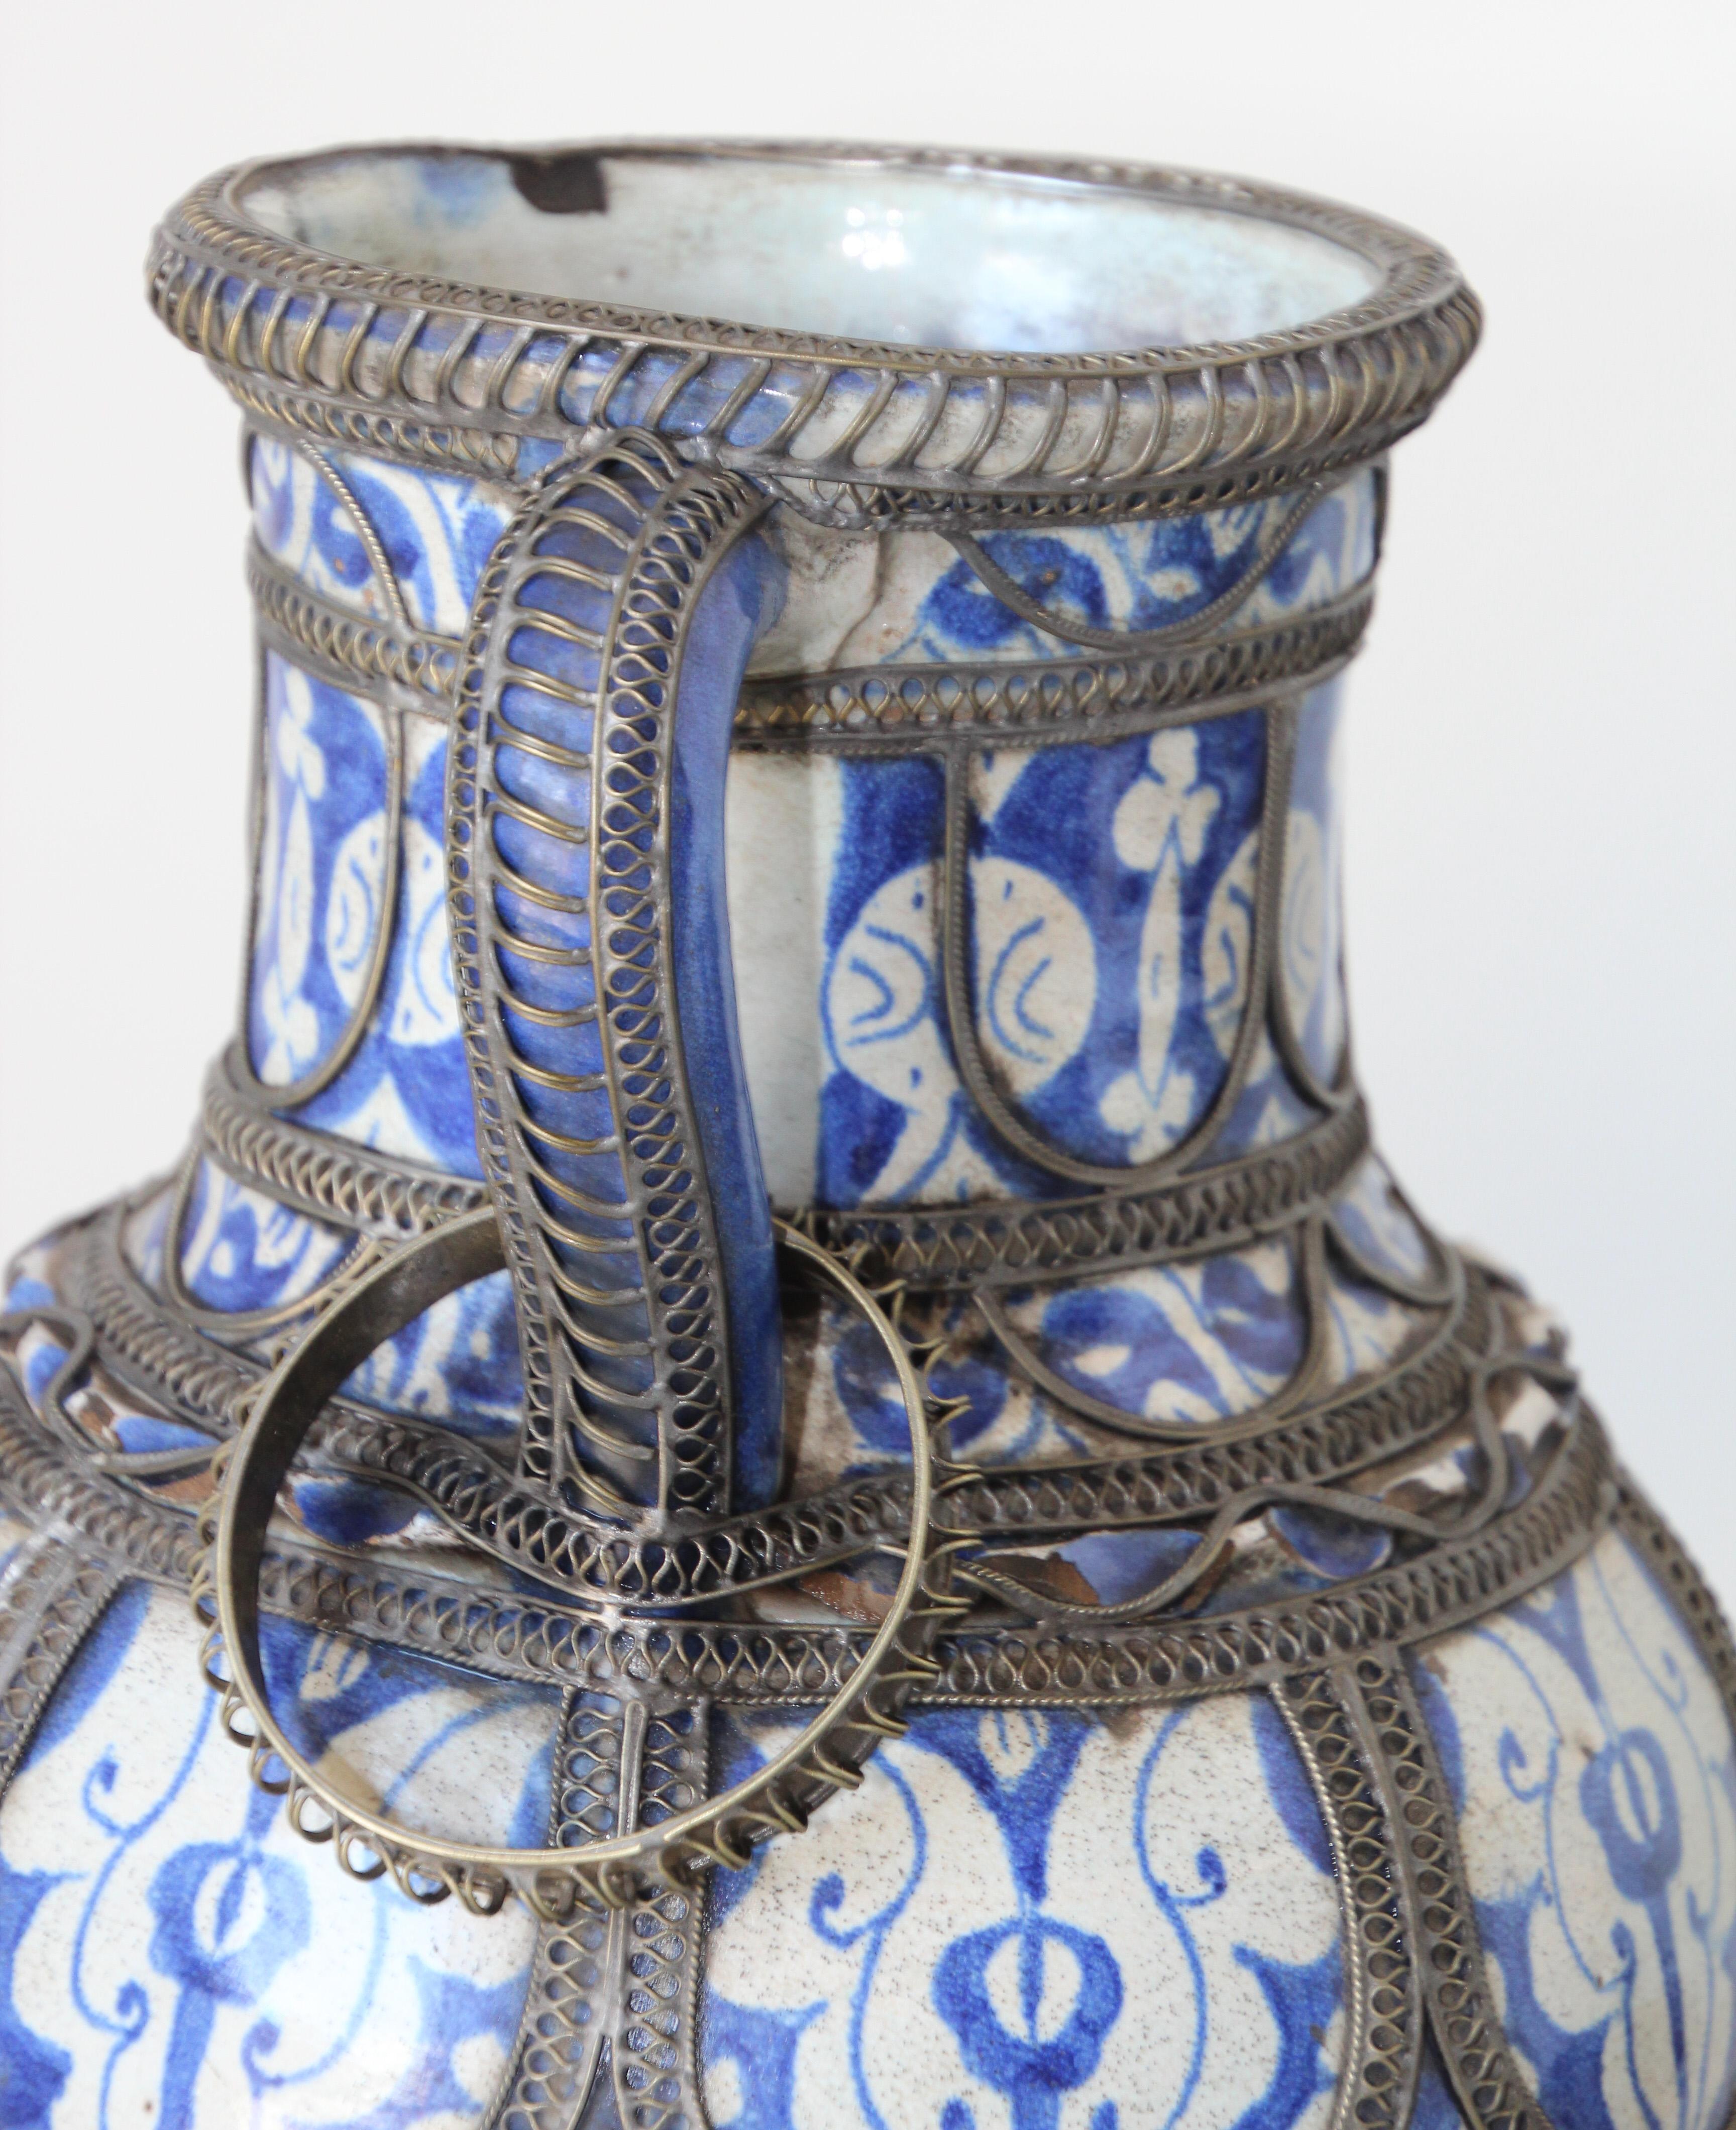  Moroccan Blue & White Ceramic Footed Vase from Fez with Silver Filigree For Sale 7